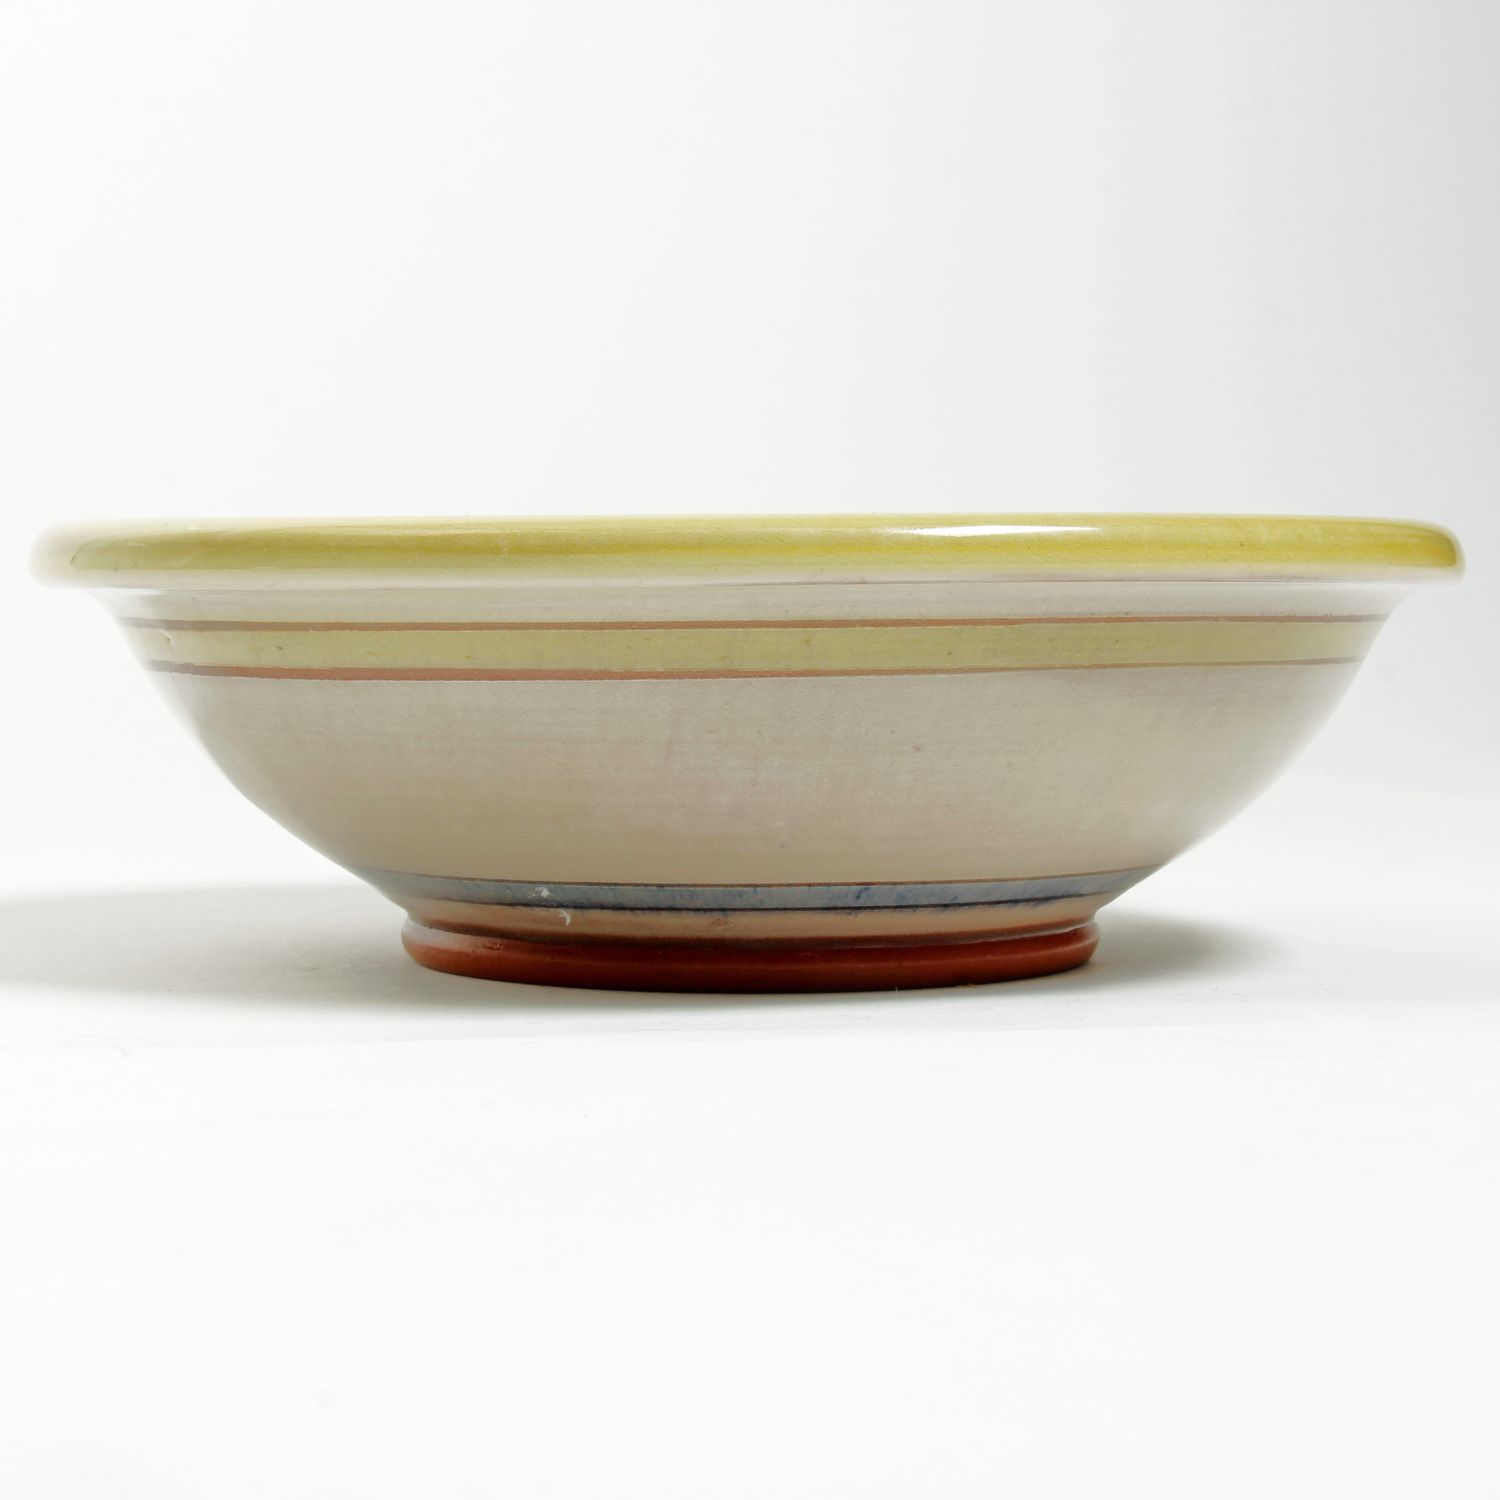 Sean Robinson: Painted Bowl in Green Product Image 2 of 3